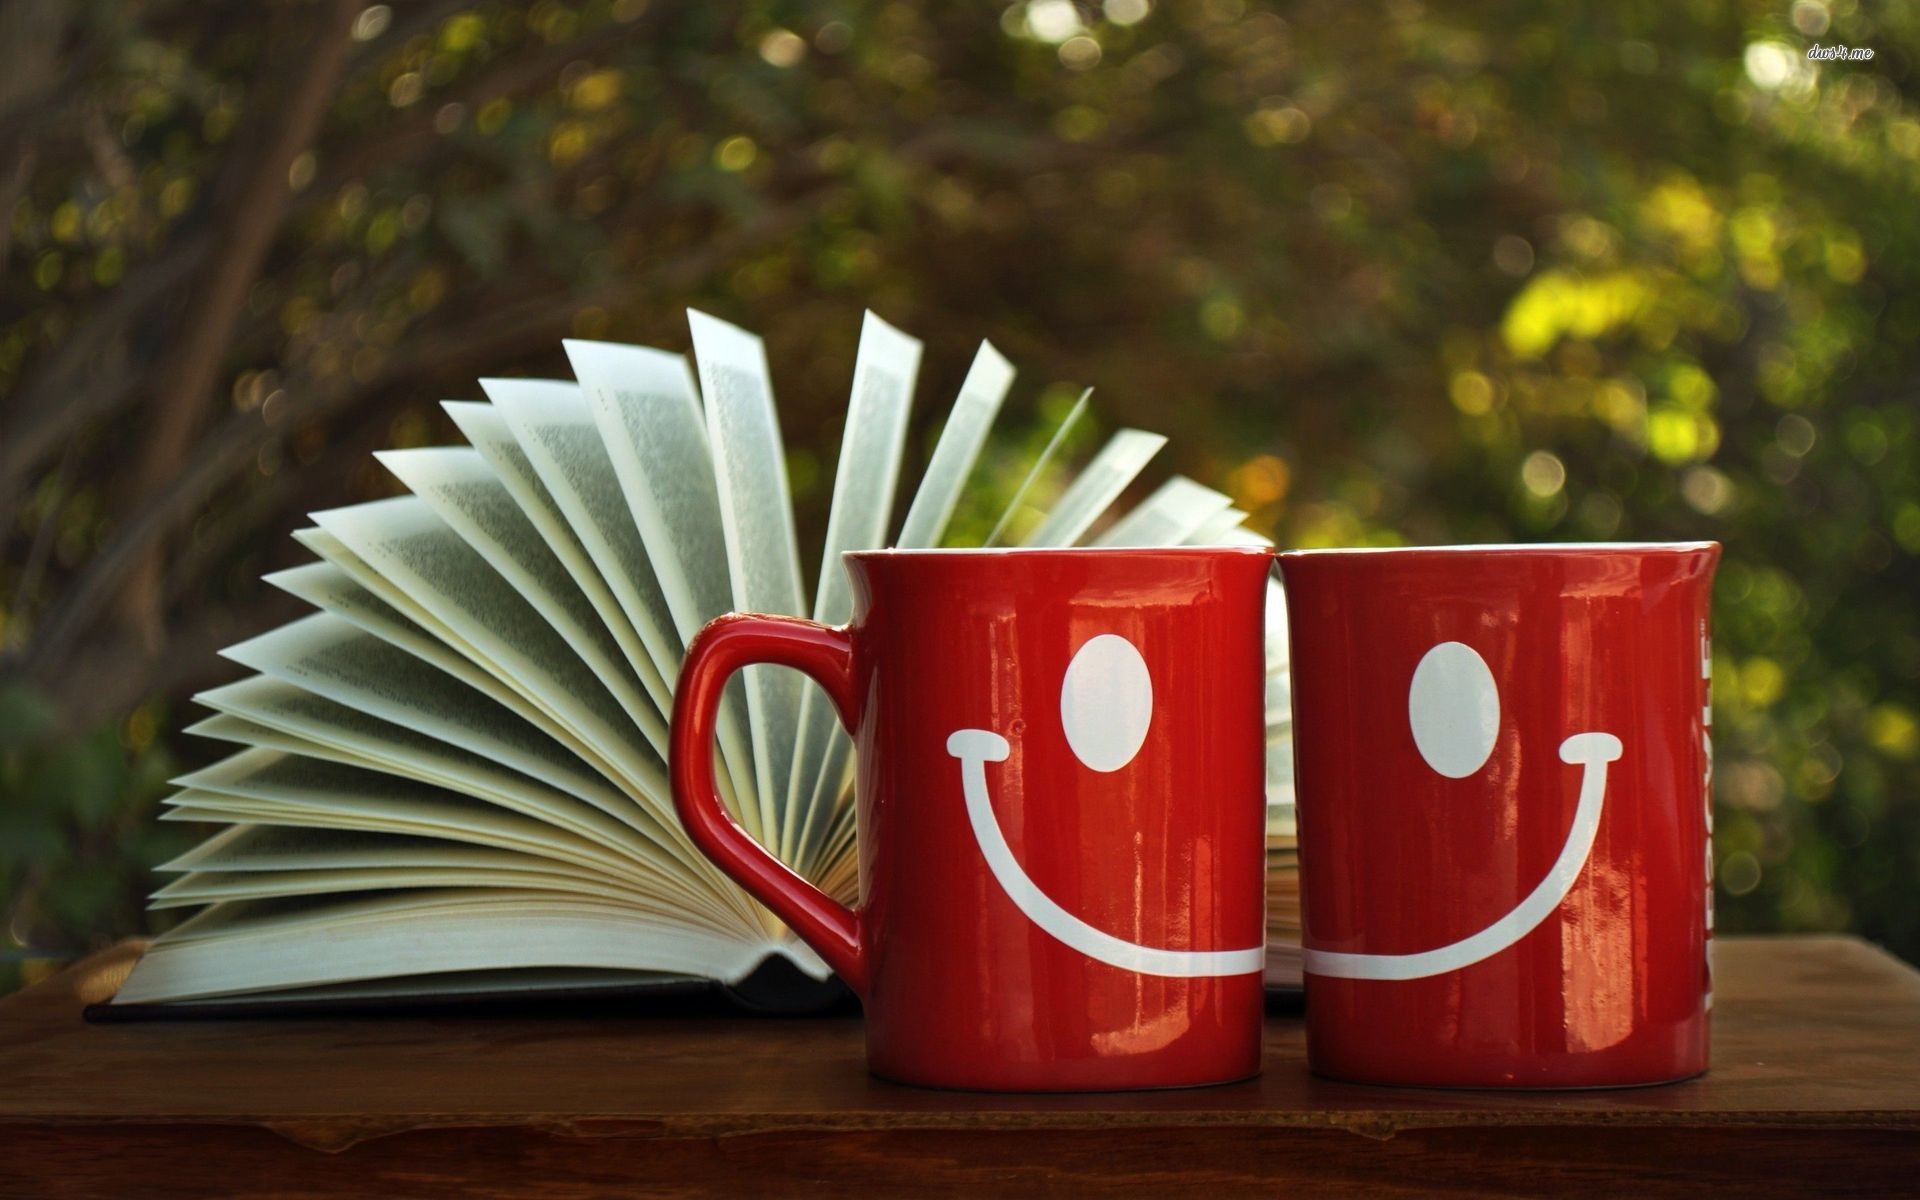 1920x1200 Happy mugs and an open book Photography HD desktop wallpaper, Book wallpaper,  Mug wallpaper, Smile wallpaper, Cup wallpaper - Photography no.